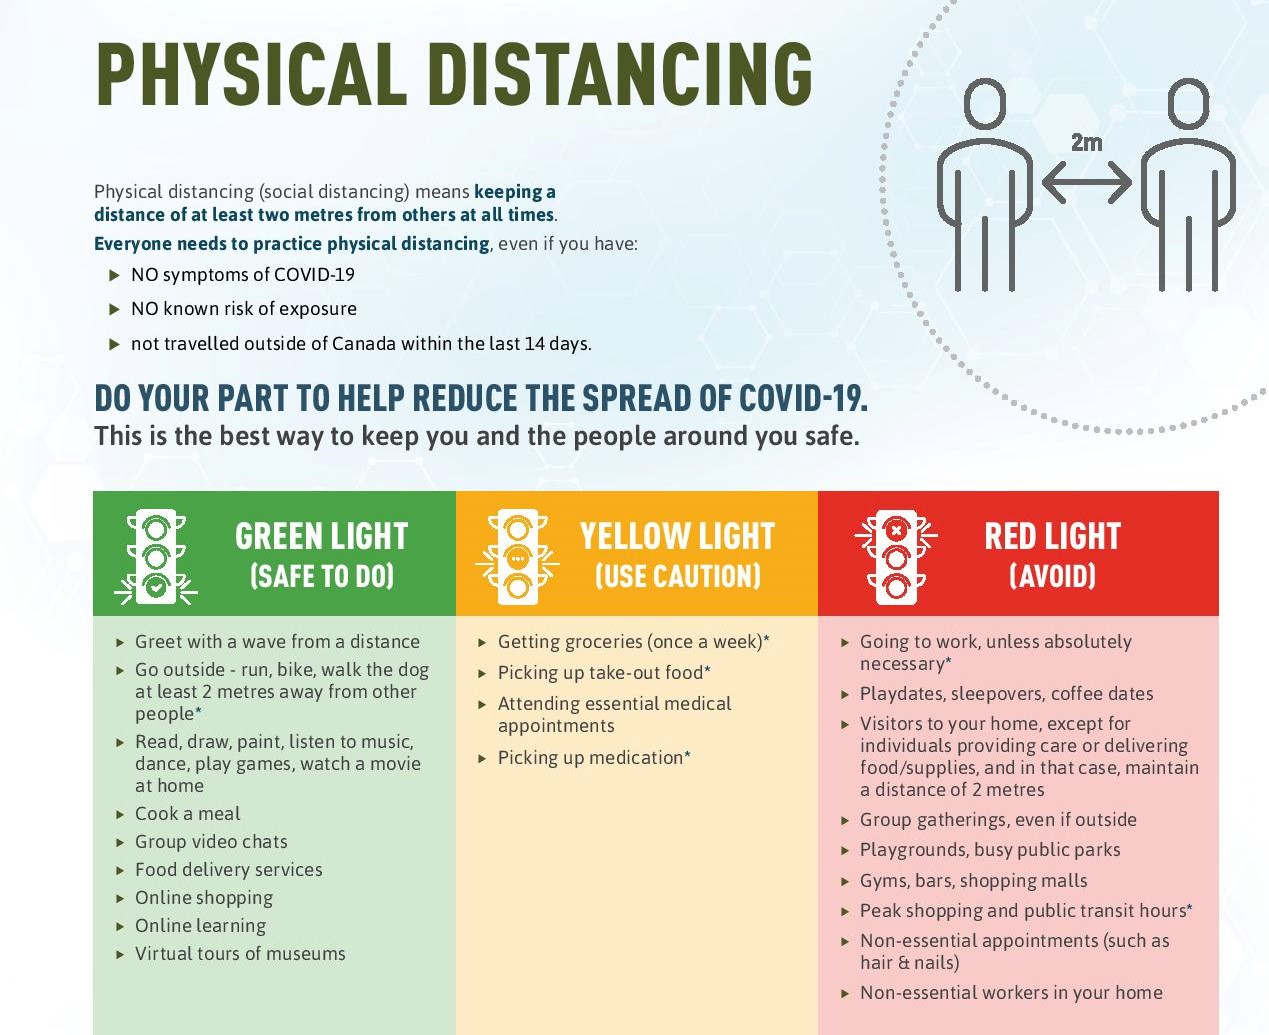 covid-19 physical distancing